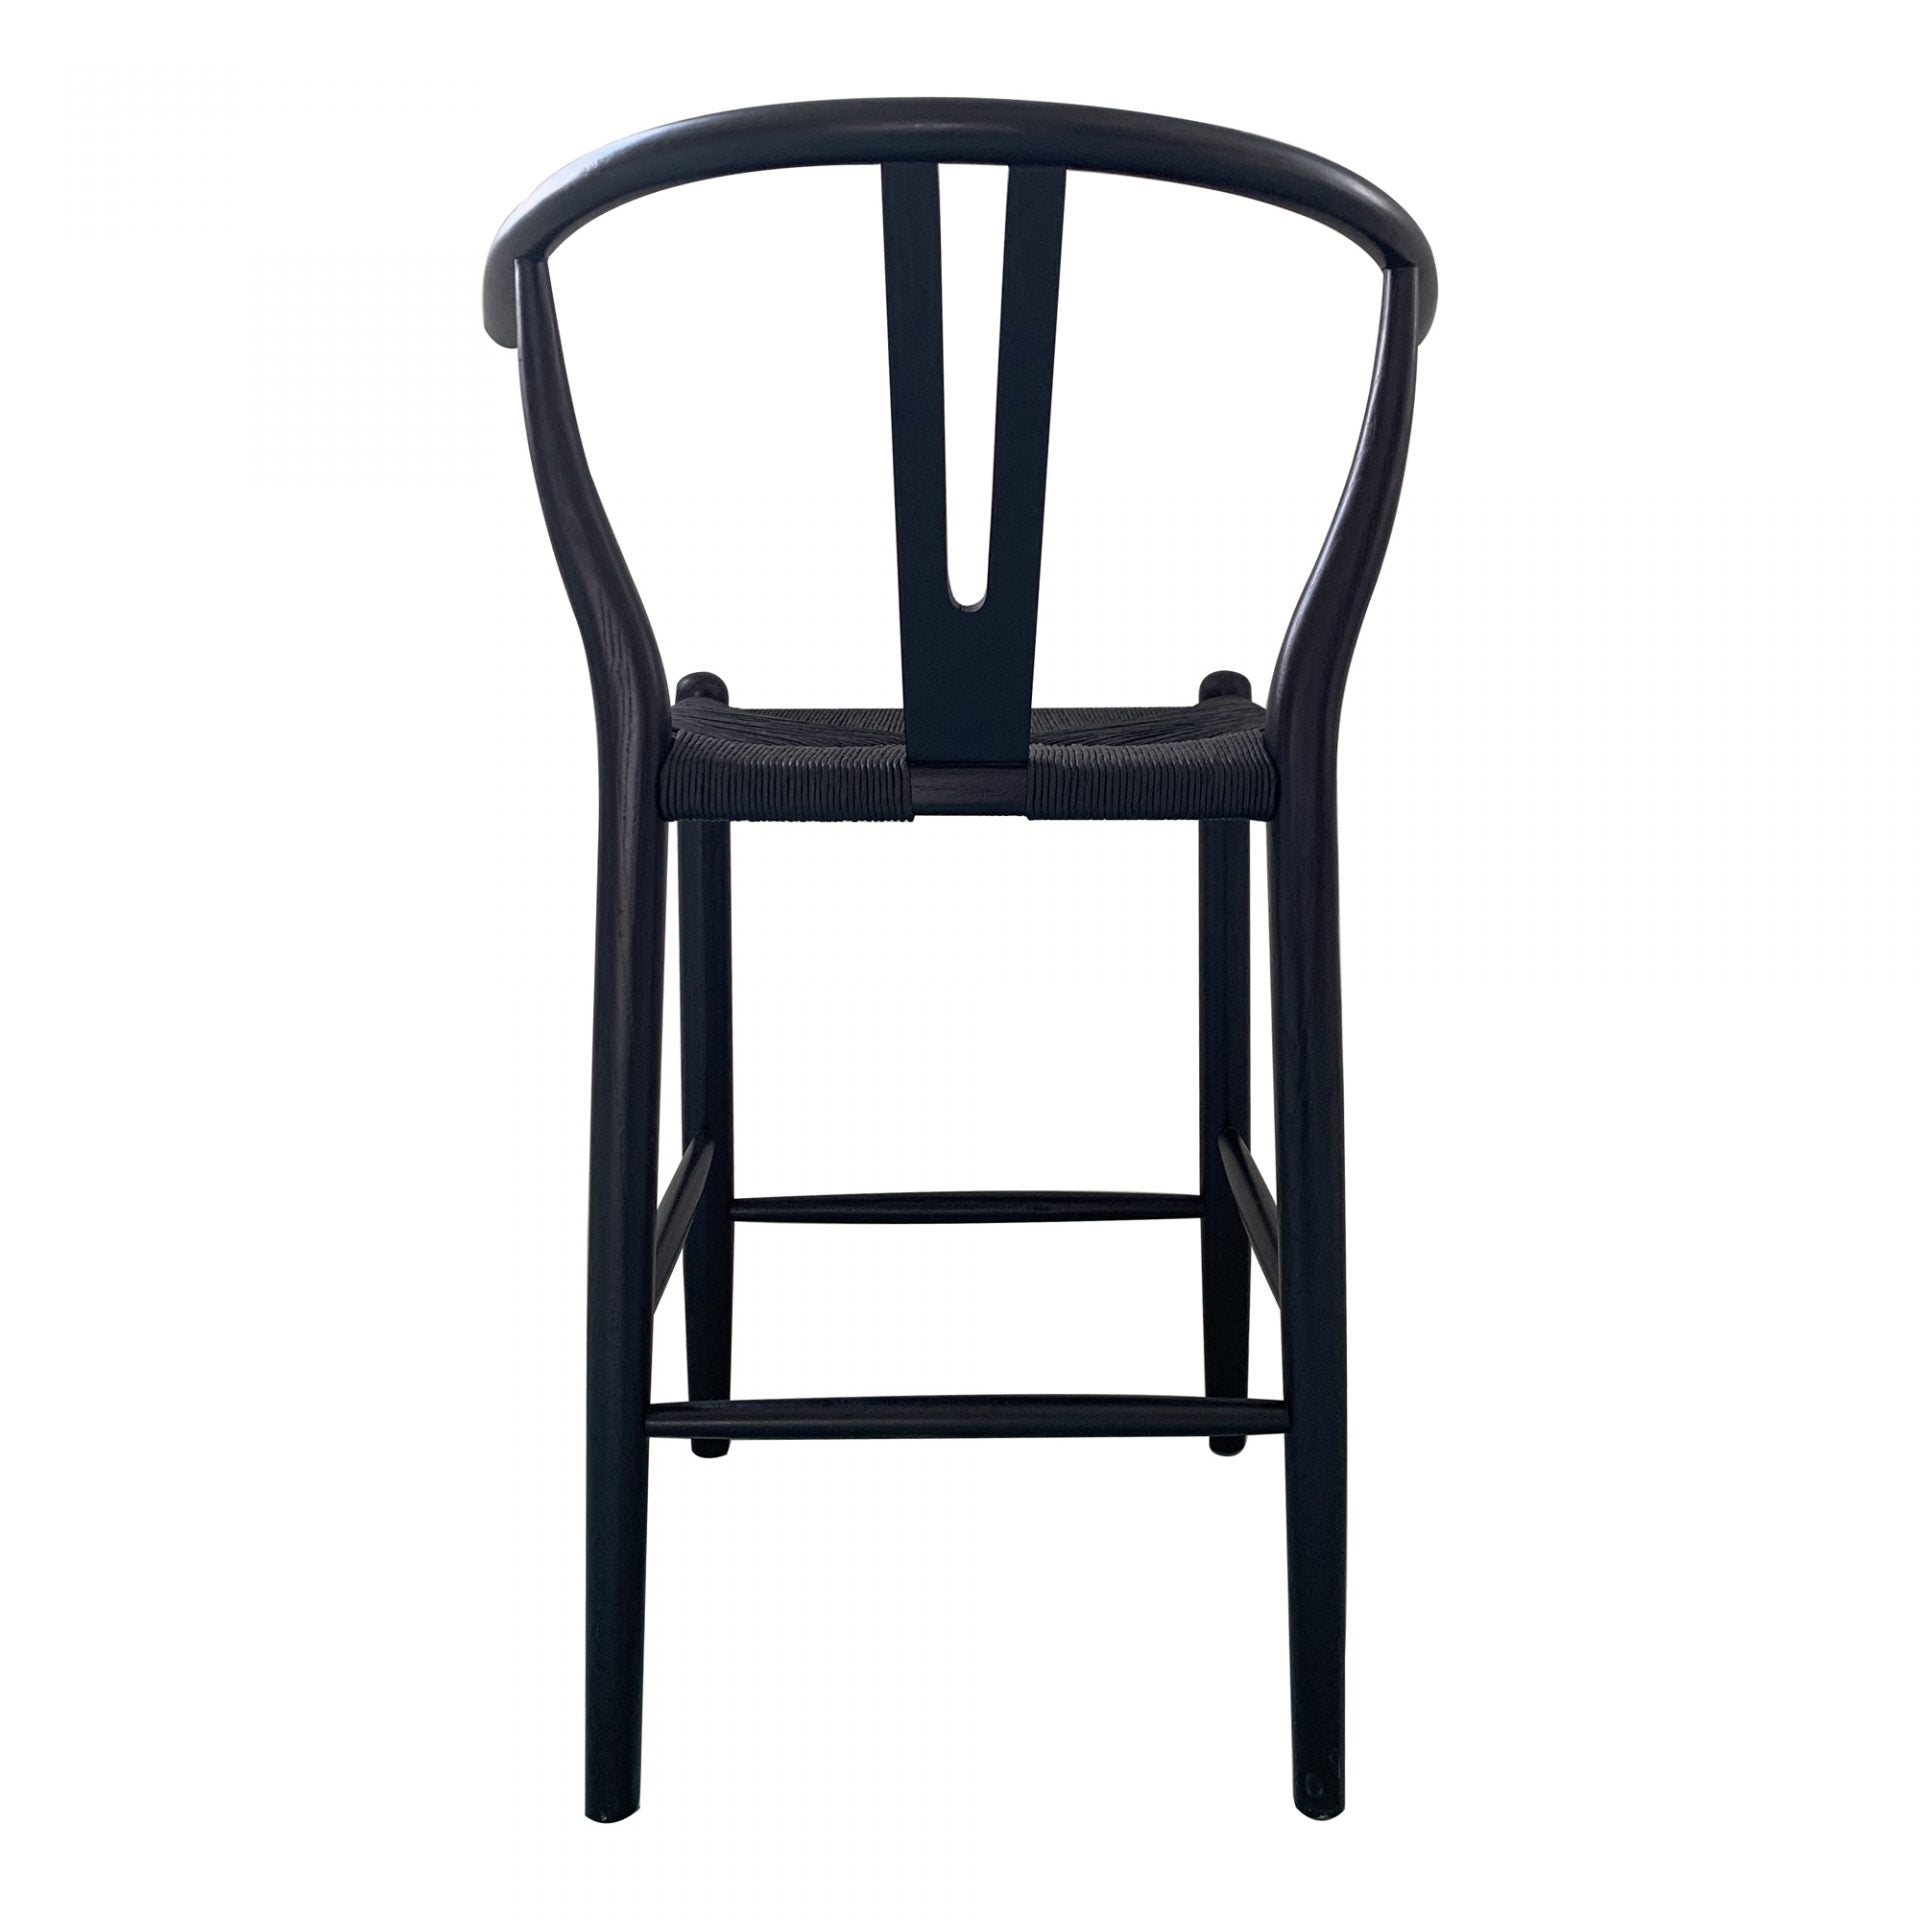 The Ventana Counter + Bar Stool - Black is a simple, sturdy construction with a  contemporary woven paper fiber seat, and convenient wrap around footrest. The stylish seat comprises solid elm wood with a black, semi-gloss finish for a lifelong stool for any kitchen, island, or bar area! 